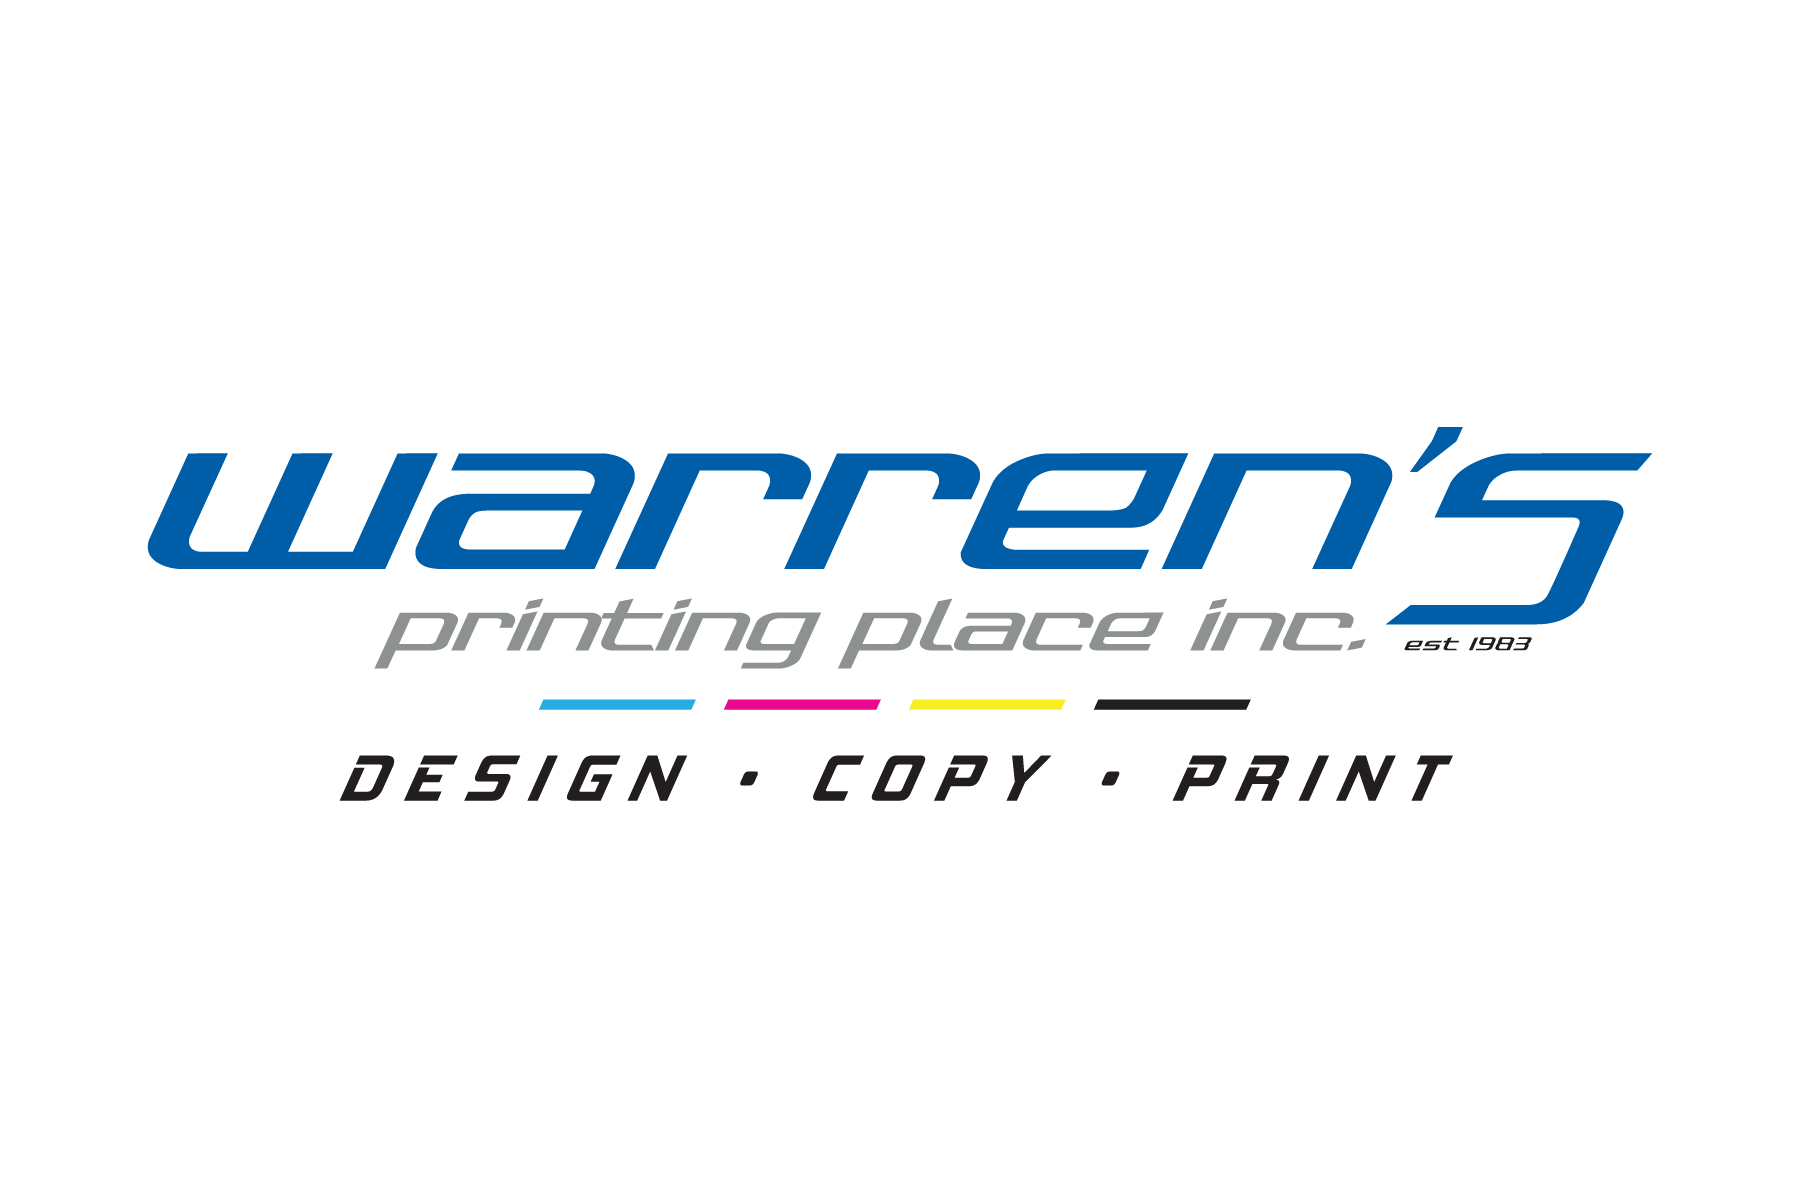 You are currently viewing Warren’s Printing Place Inc.